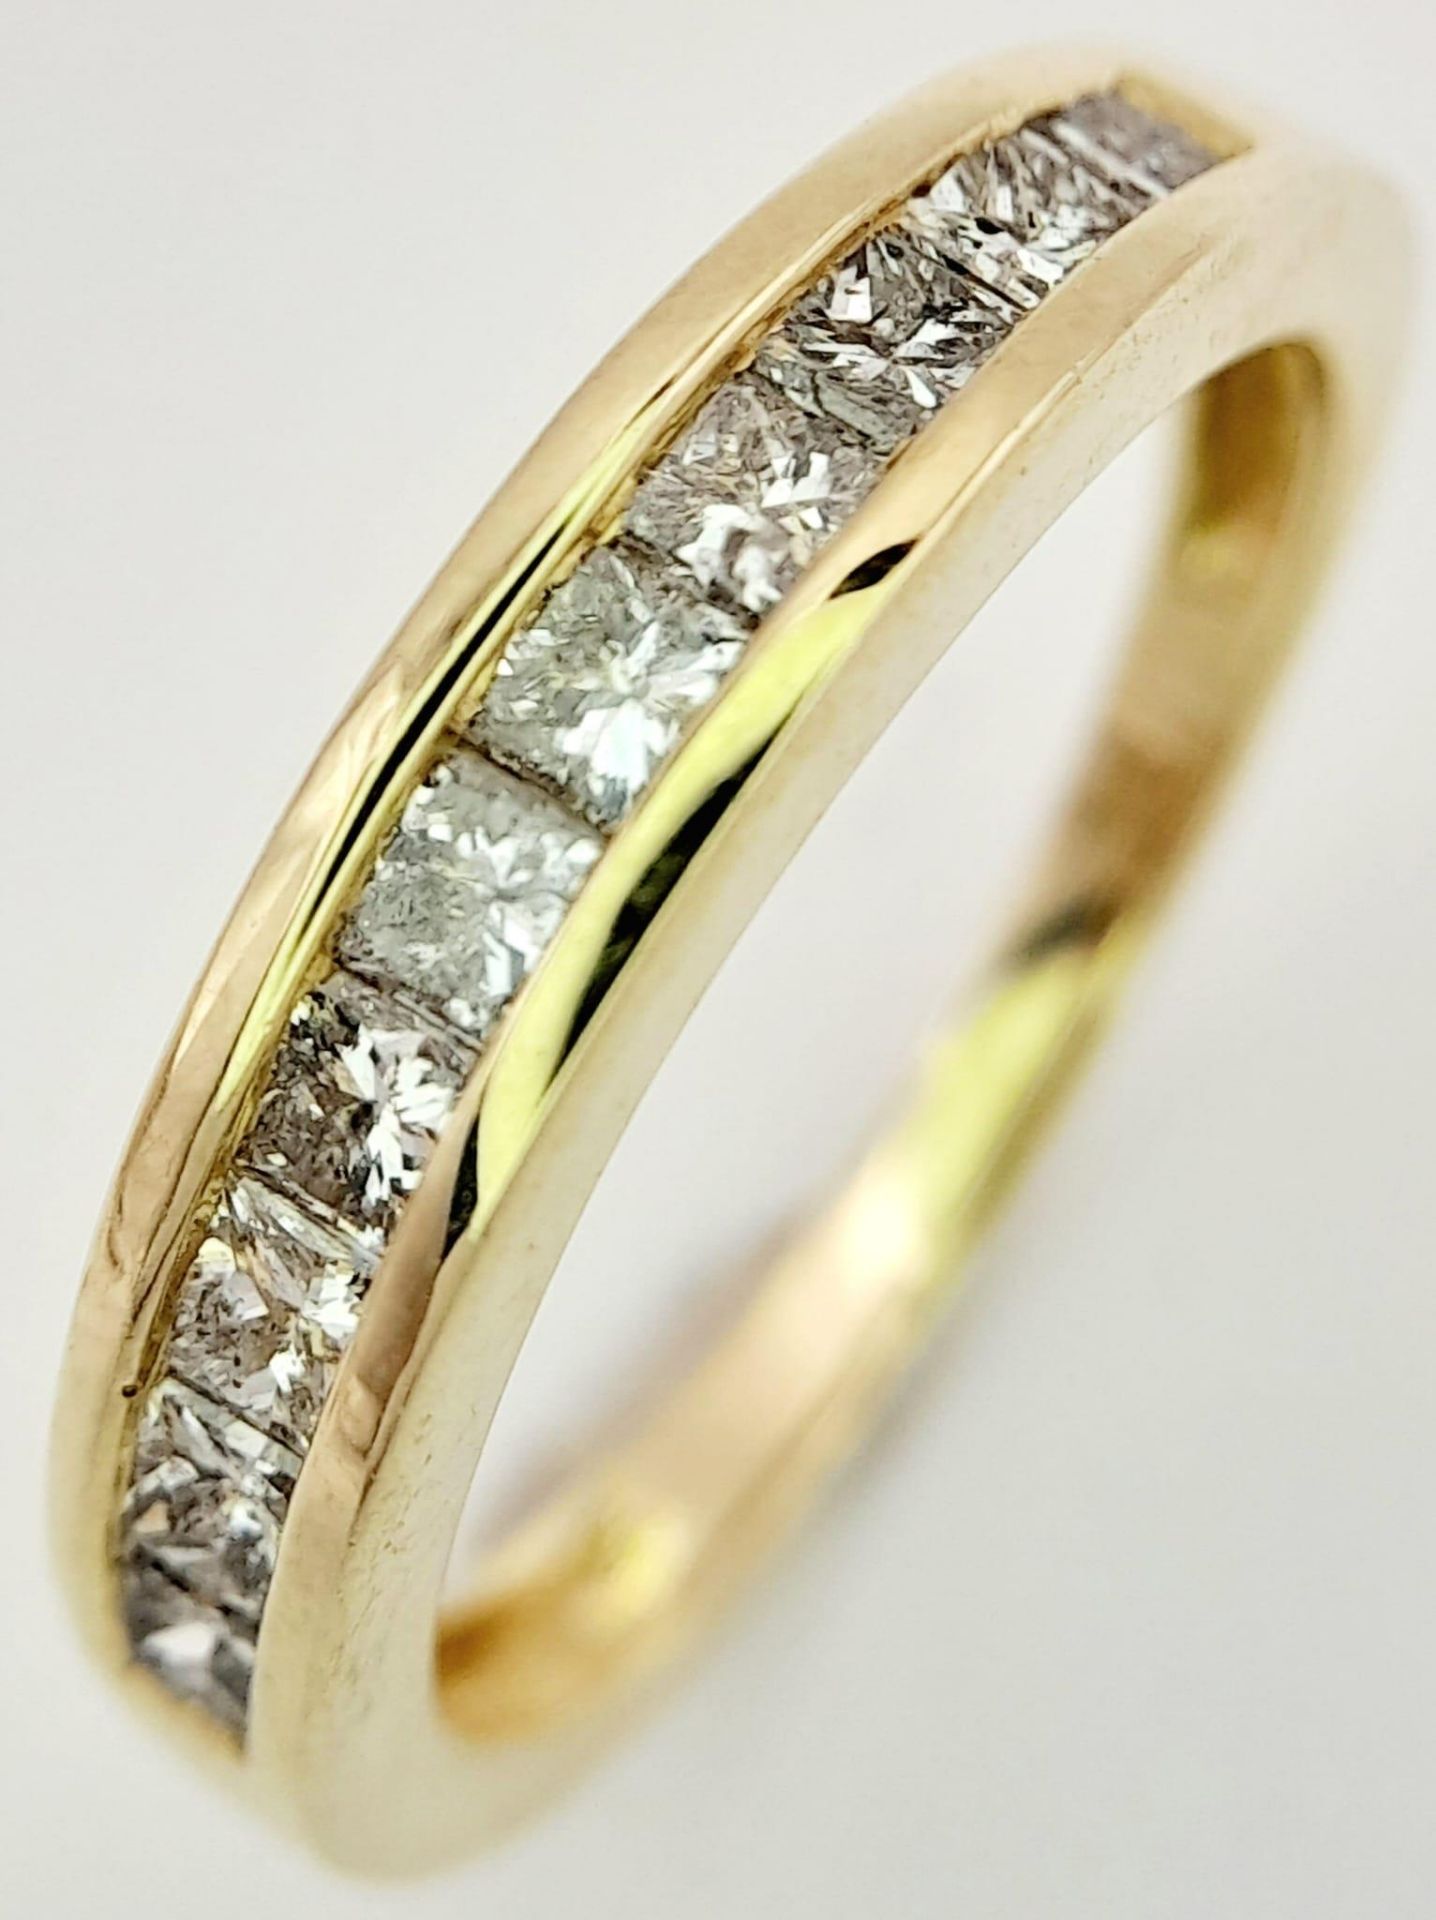 A 9K Yellow Gold Diamond Set Half Eternity Ring. 0.40ctw, Size N, 2.5g total weight. Ref: 8419